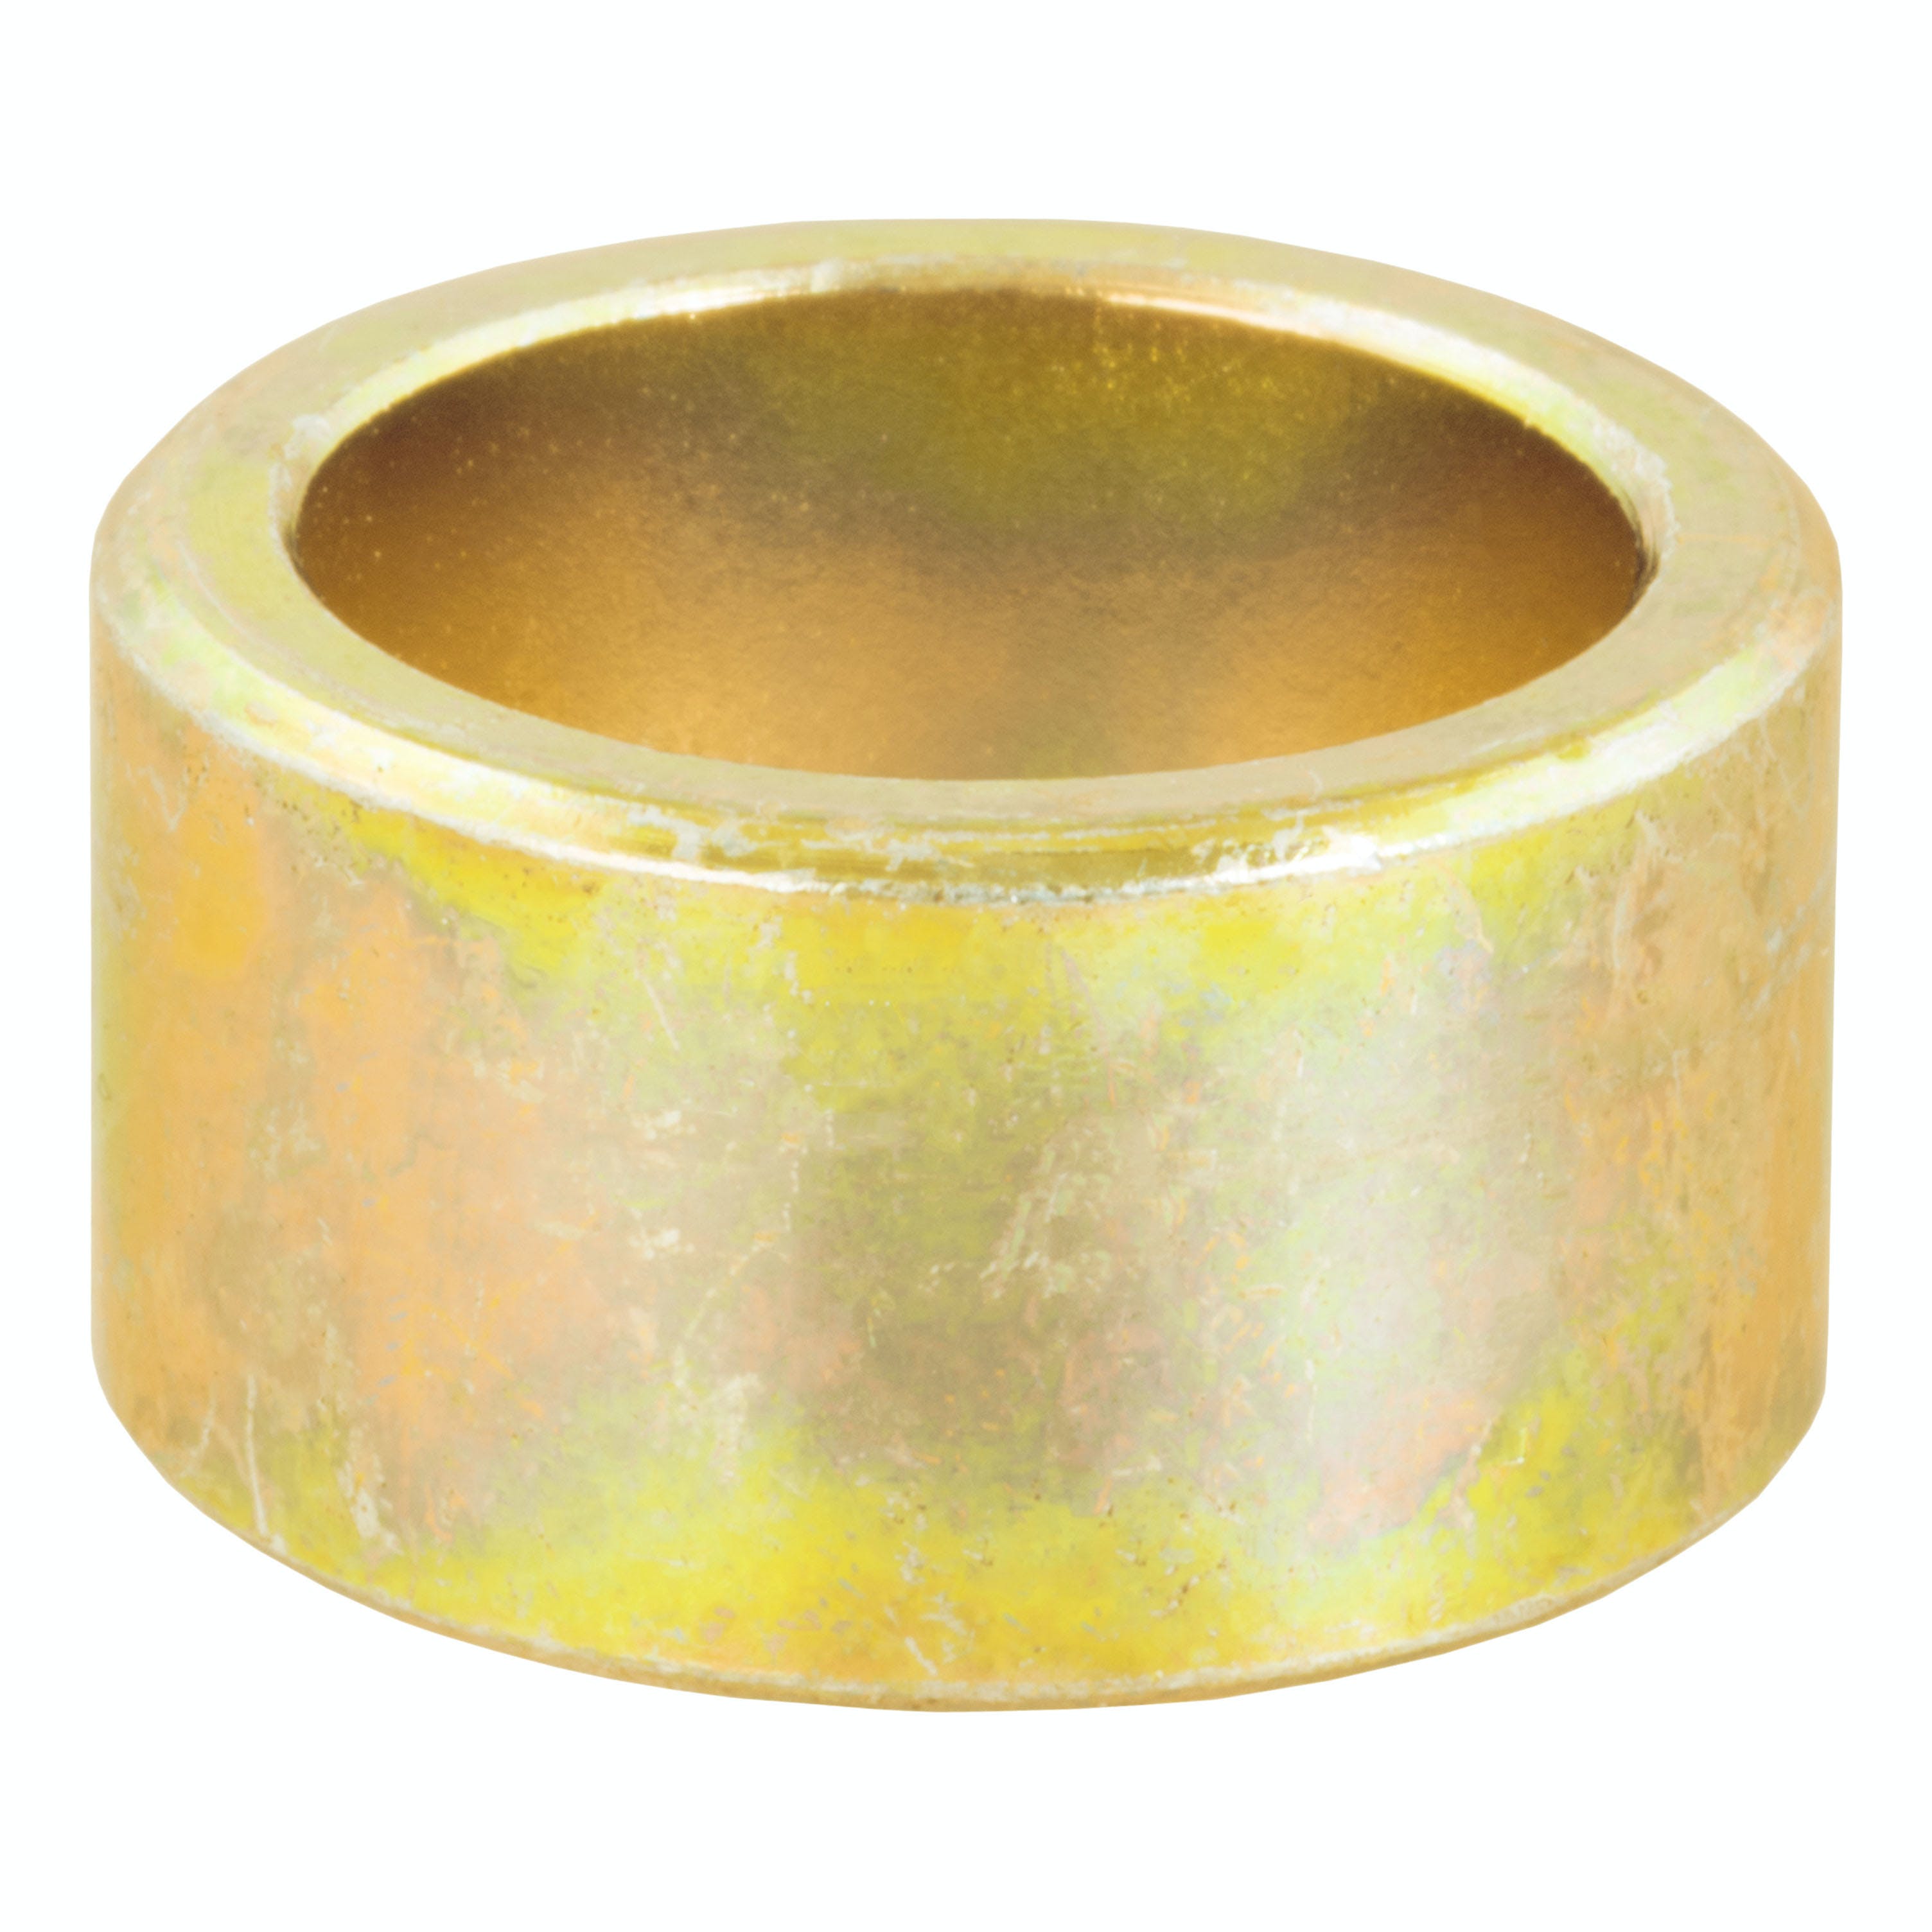 CURT 21100 Trailer Ball Reducer Bushing (From 1 to 3/4 Stem)